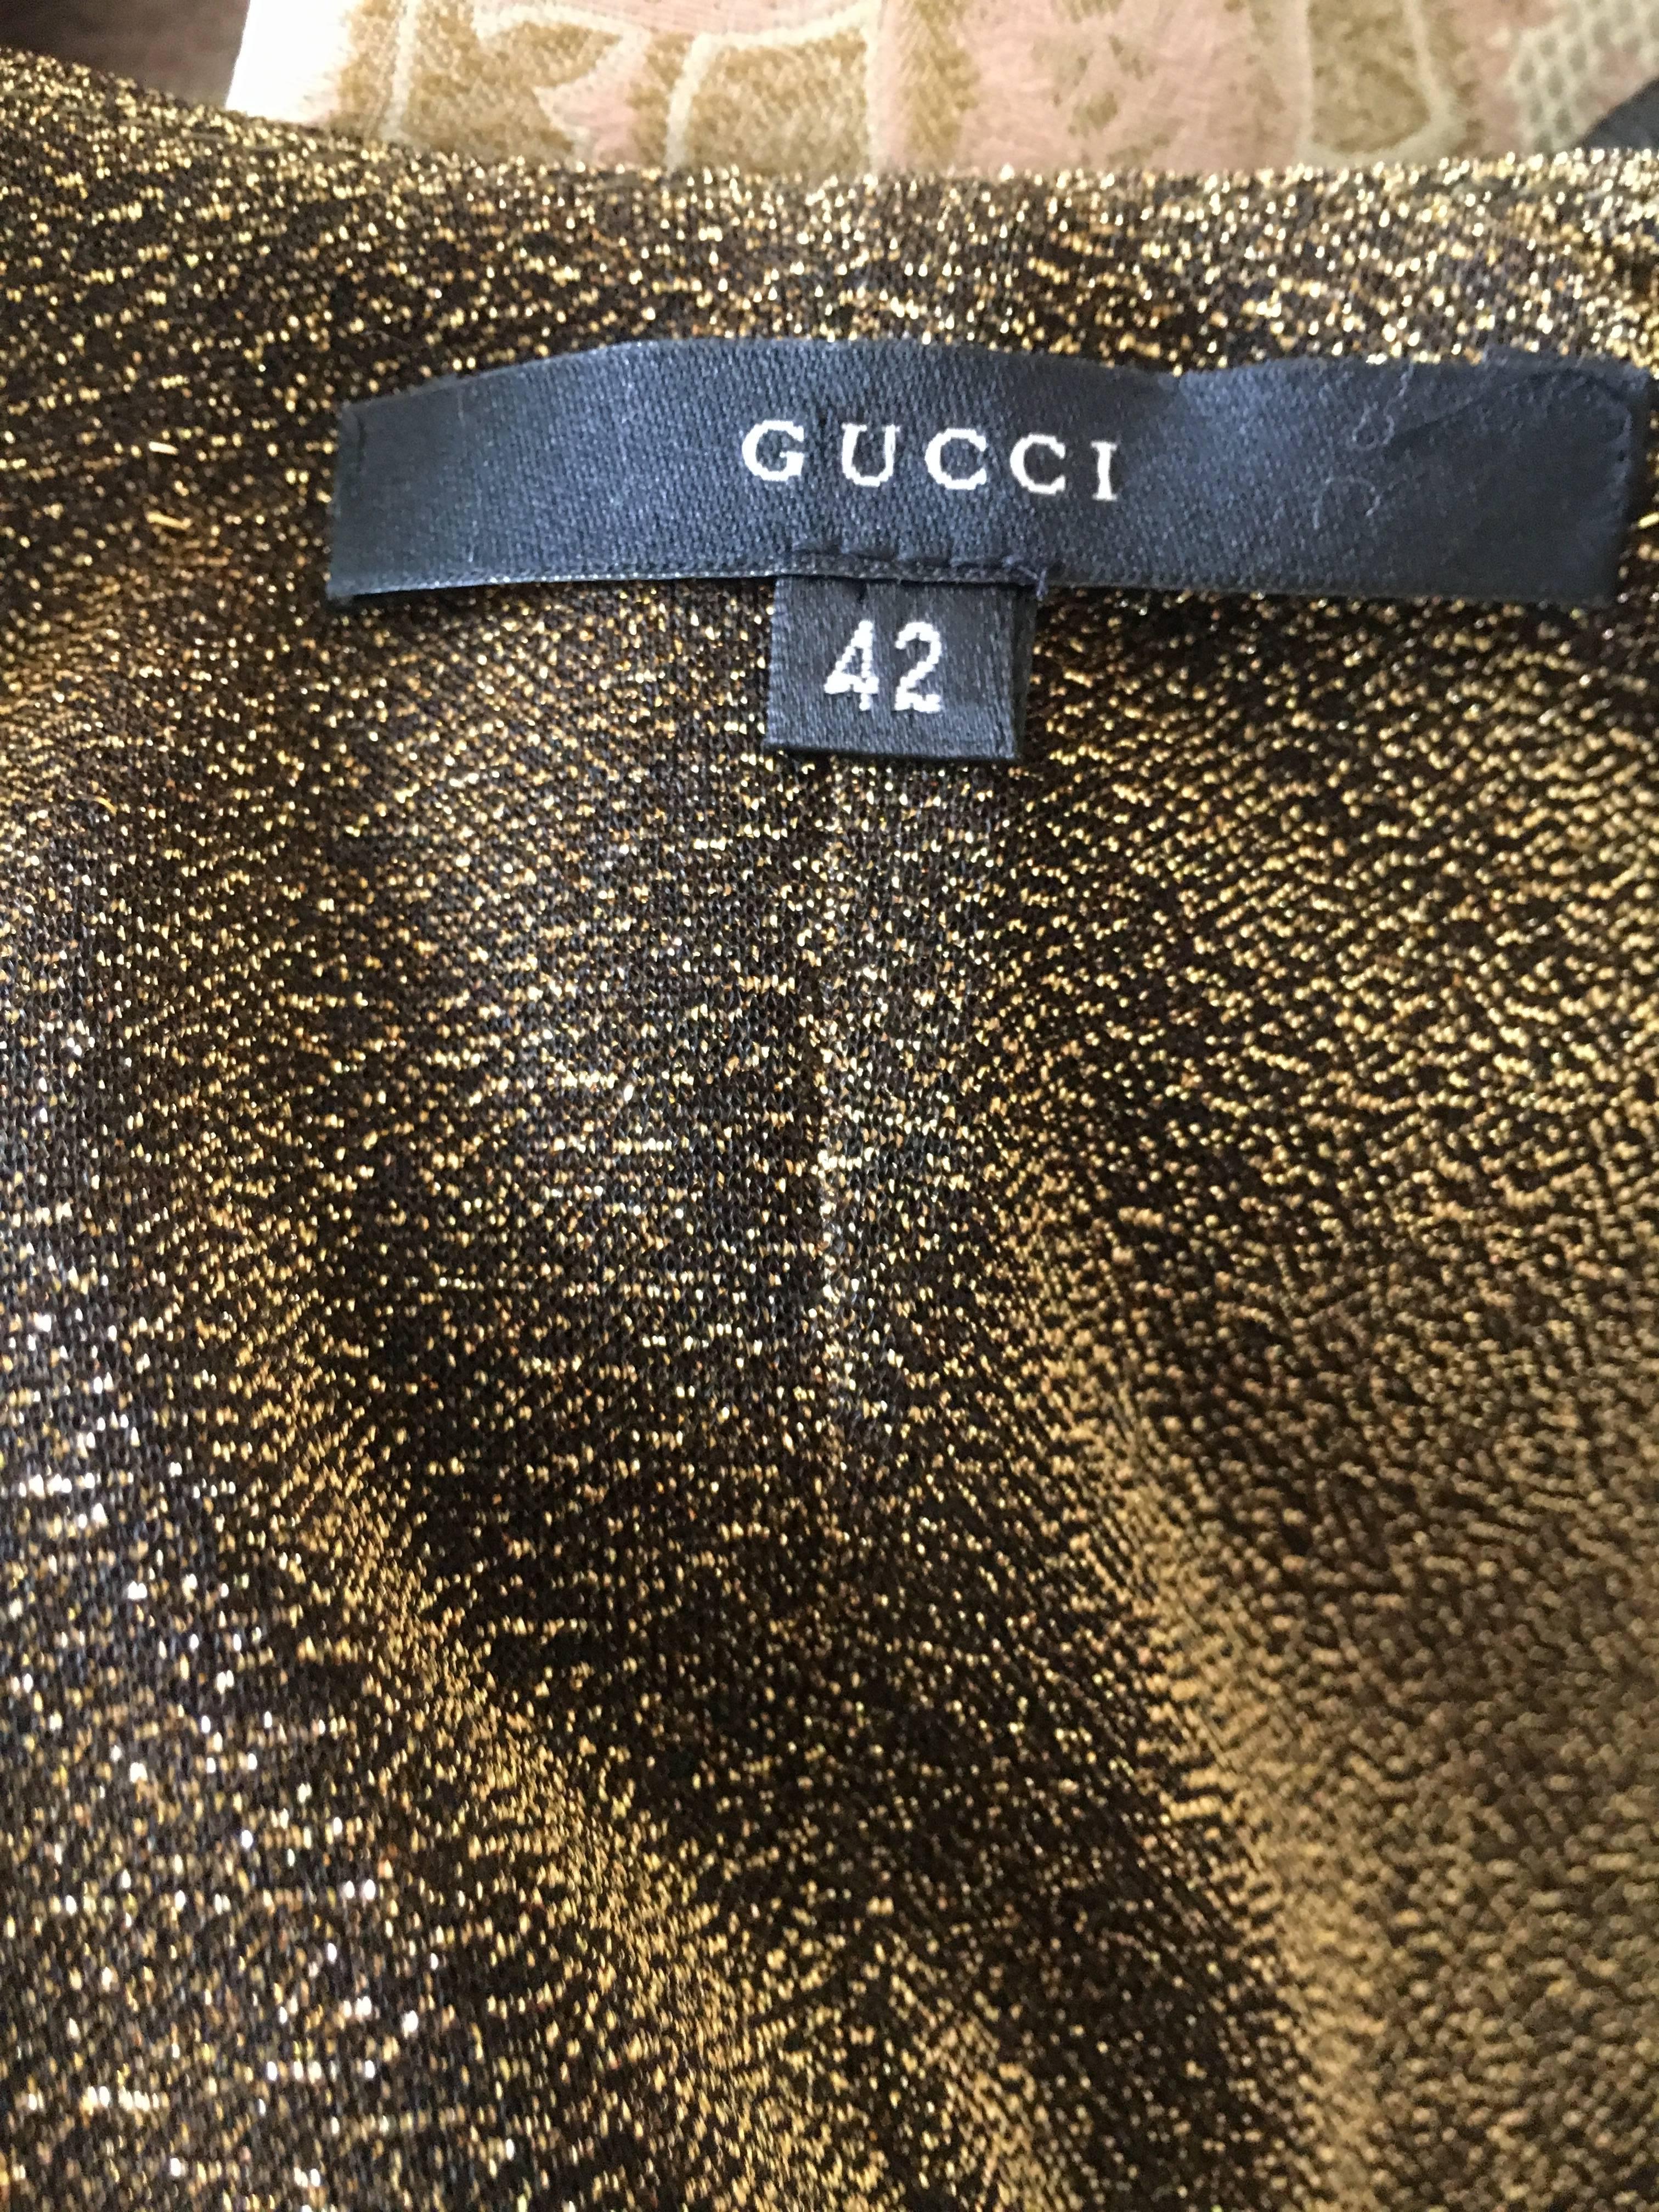 Gucci by Tom Ford Low Cut Gold Dress with Dragon Detail 2